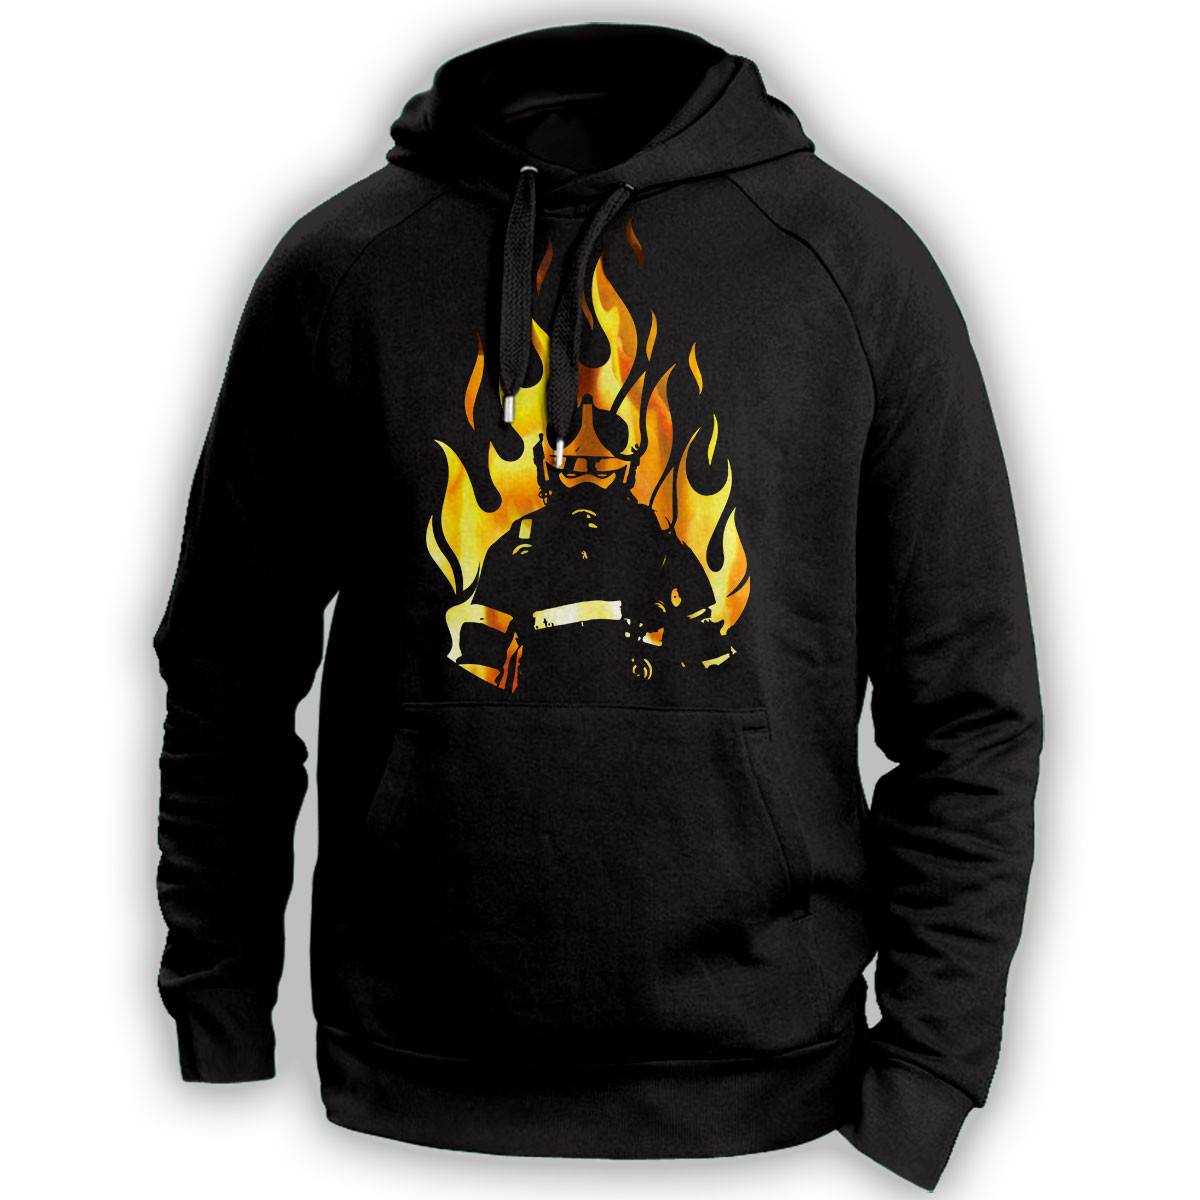 "Fireman Because Danger Never Takes A Day Off" Hoodie